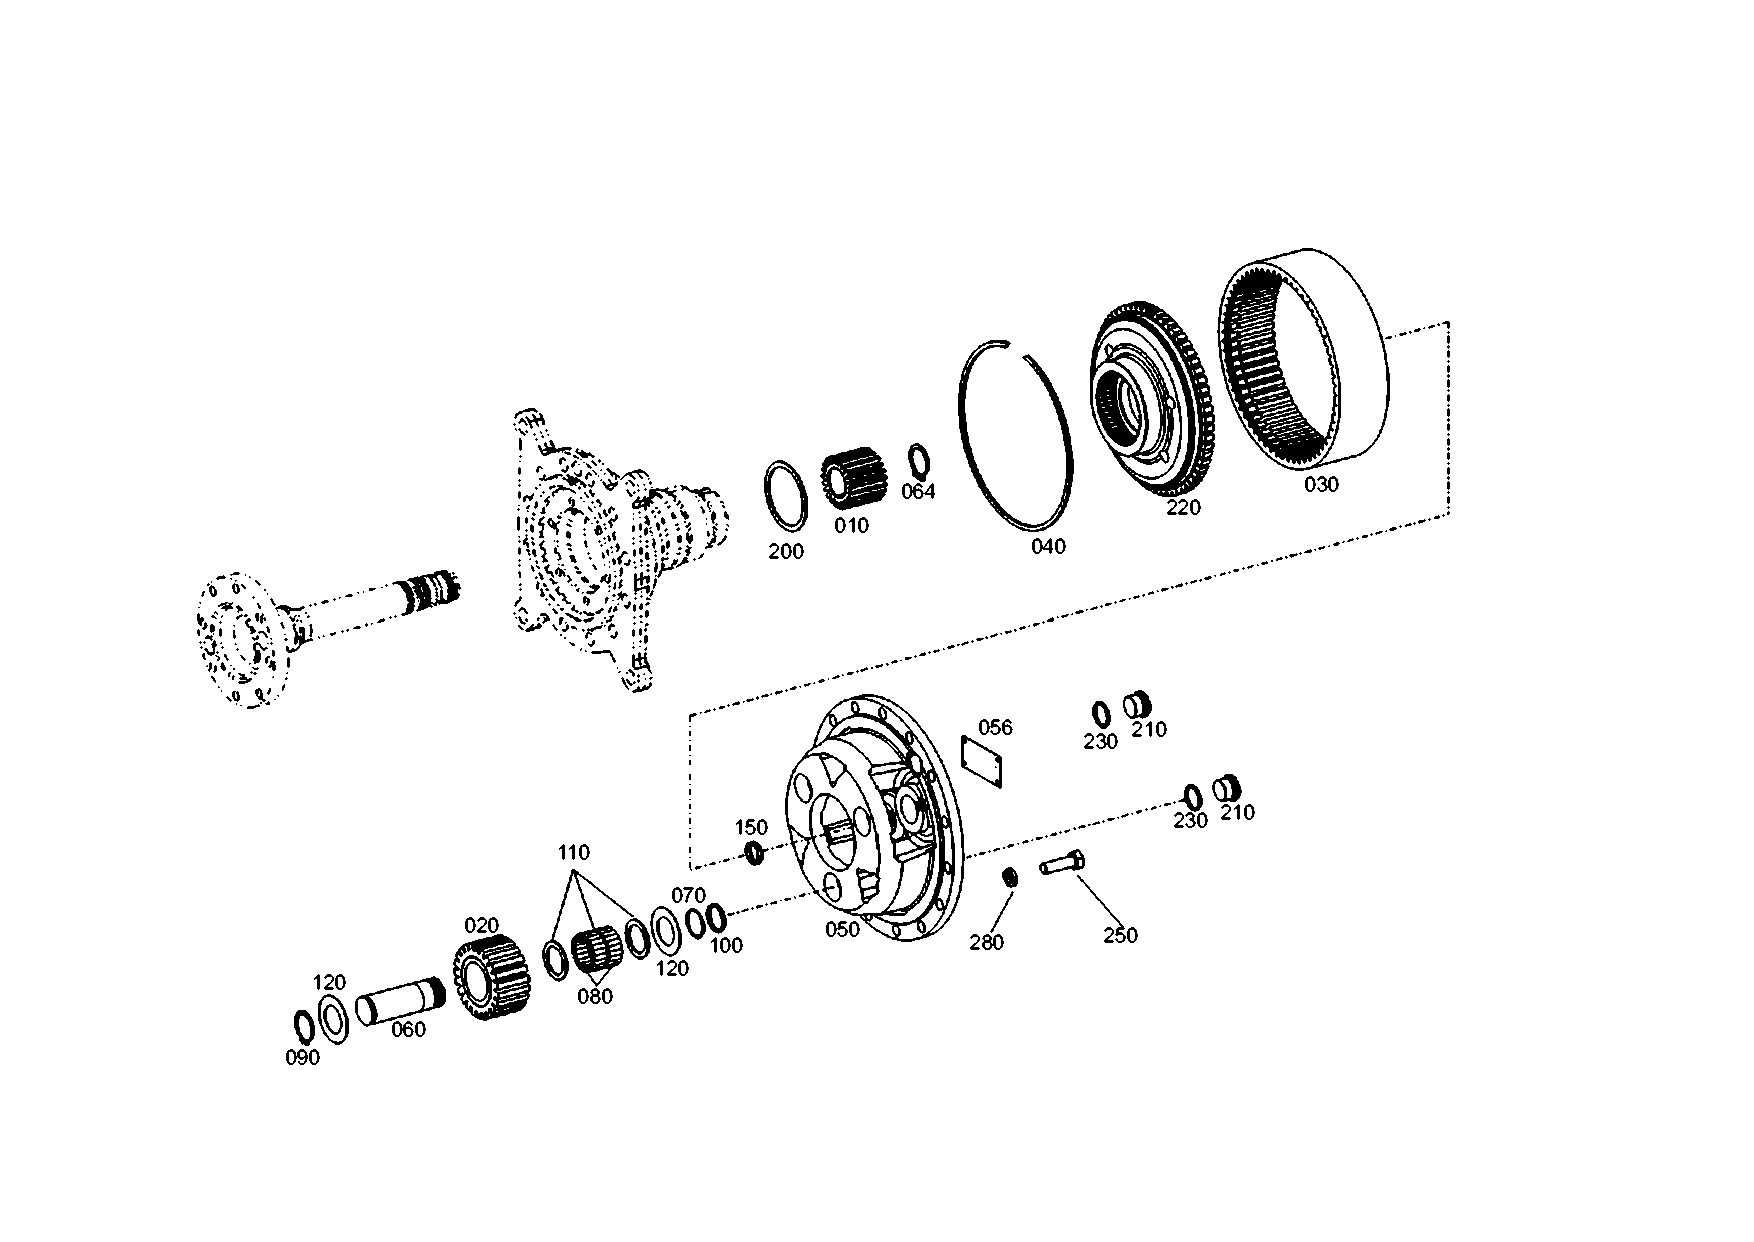 drawing for NISSAN MOTOR CO. 07902190-0 - WASHER (figure 1)